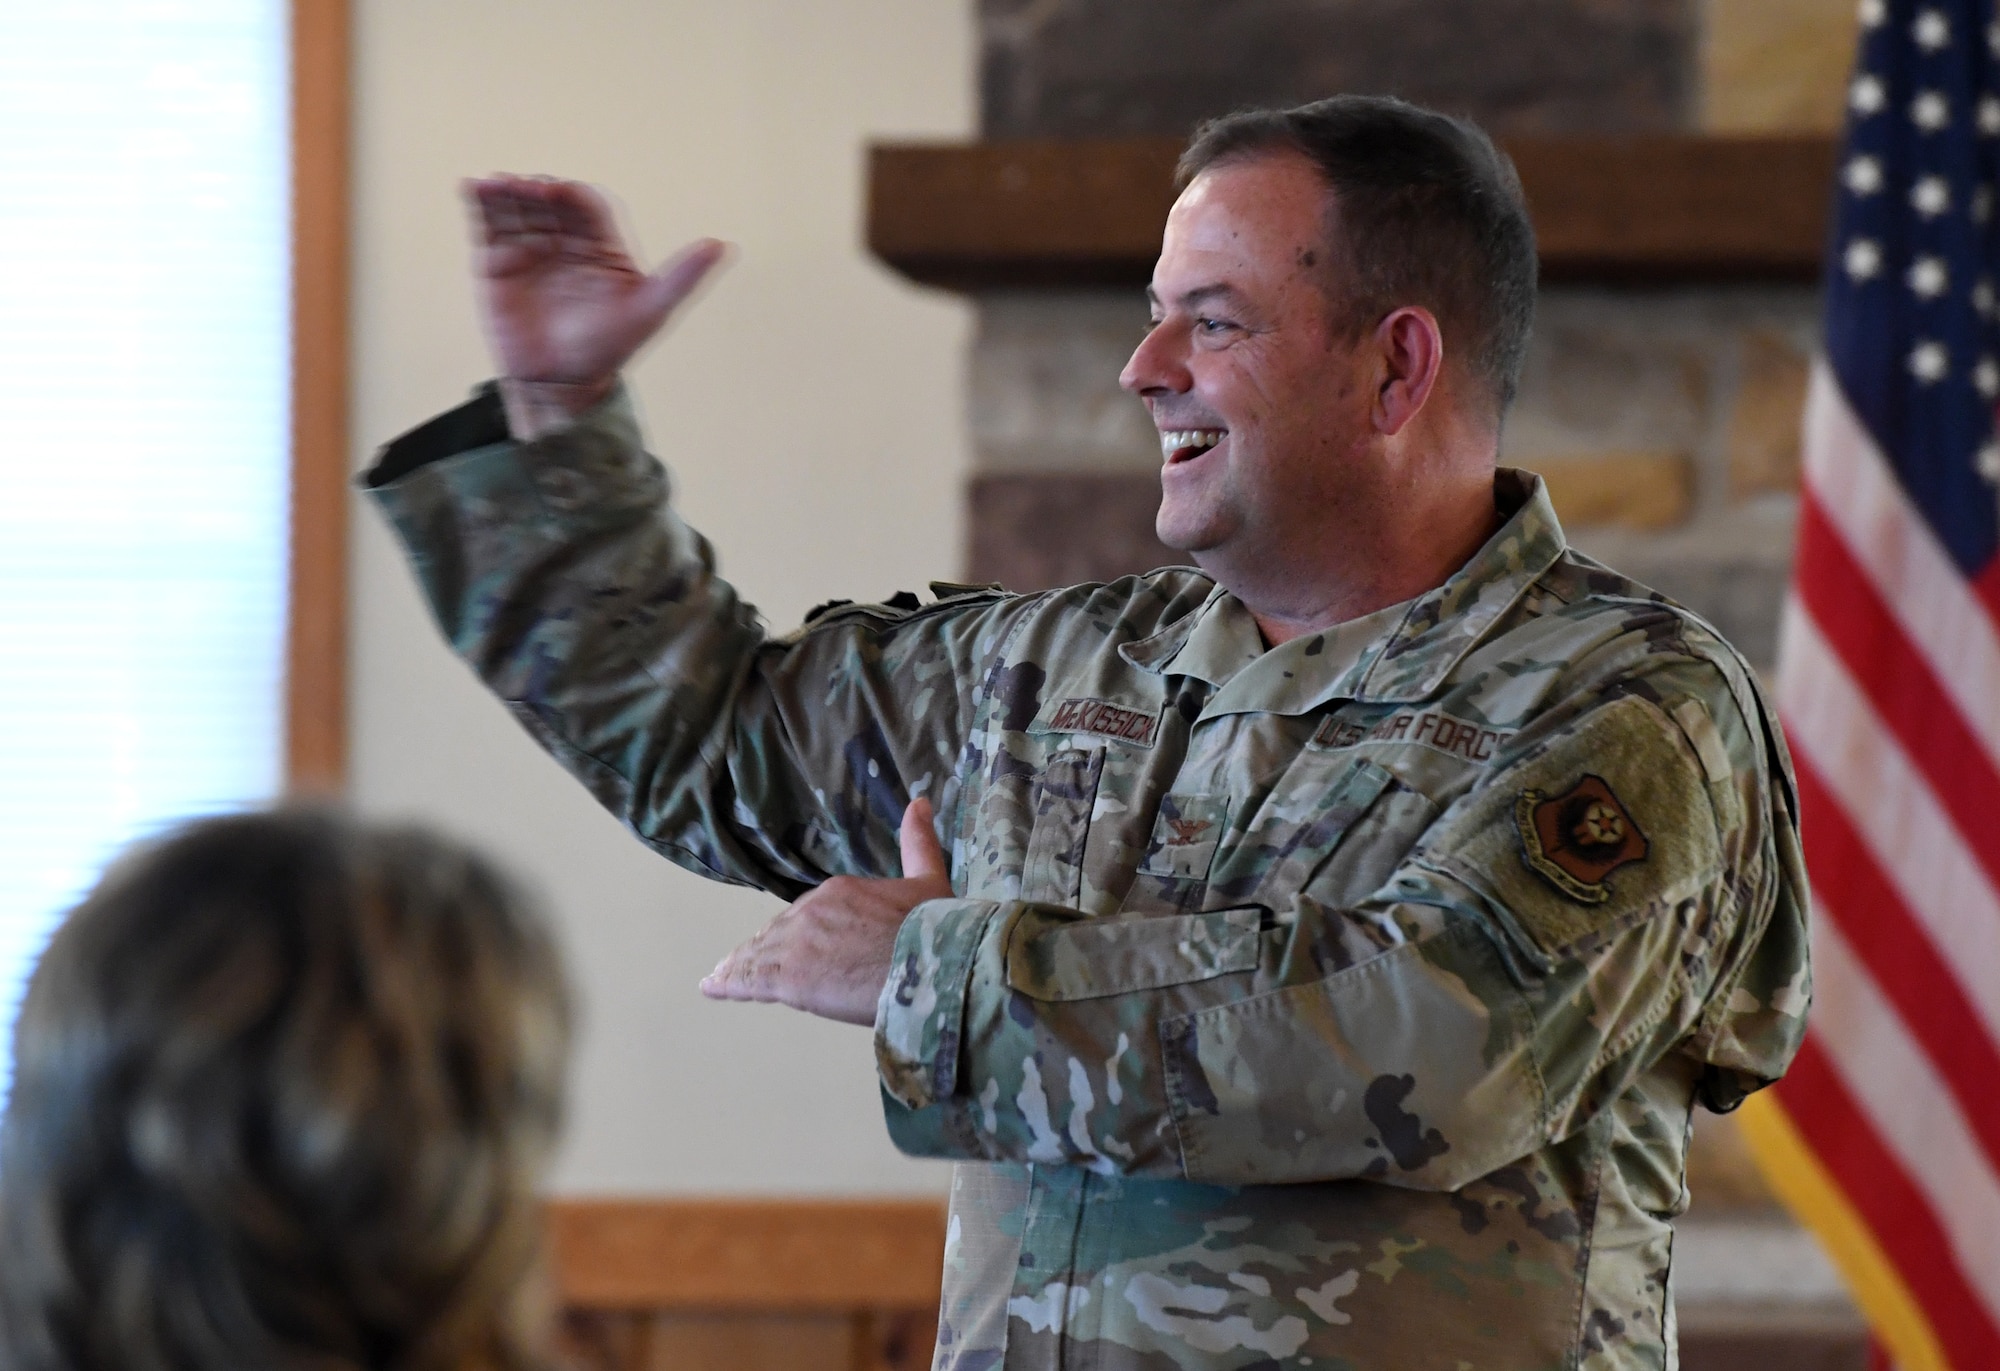 U.S. Air Force Col. Eric McKissick, vice commander of the 193rd Special Operations Wing, shares insights from wing leadership during the leadership development program held at Fort Indiantown Gap, Pennsylvania Sept. 20, 2022.